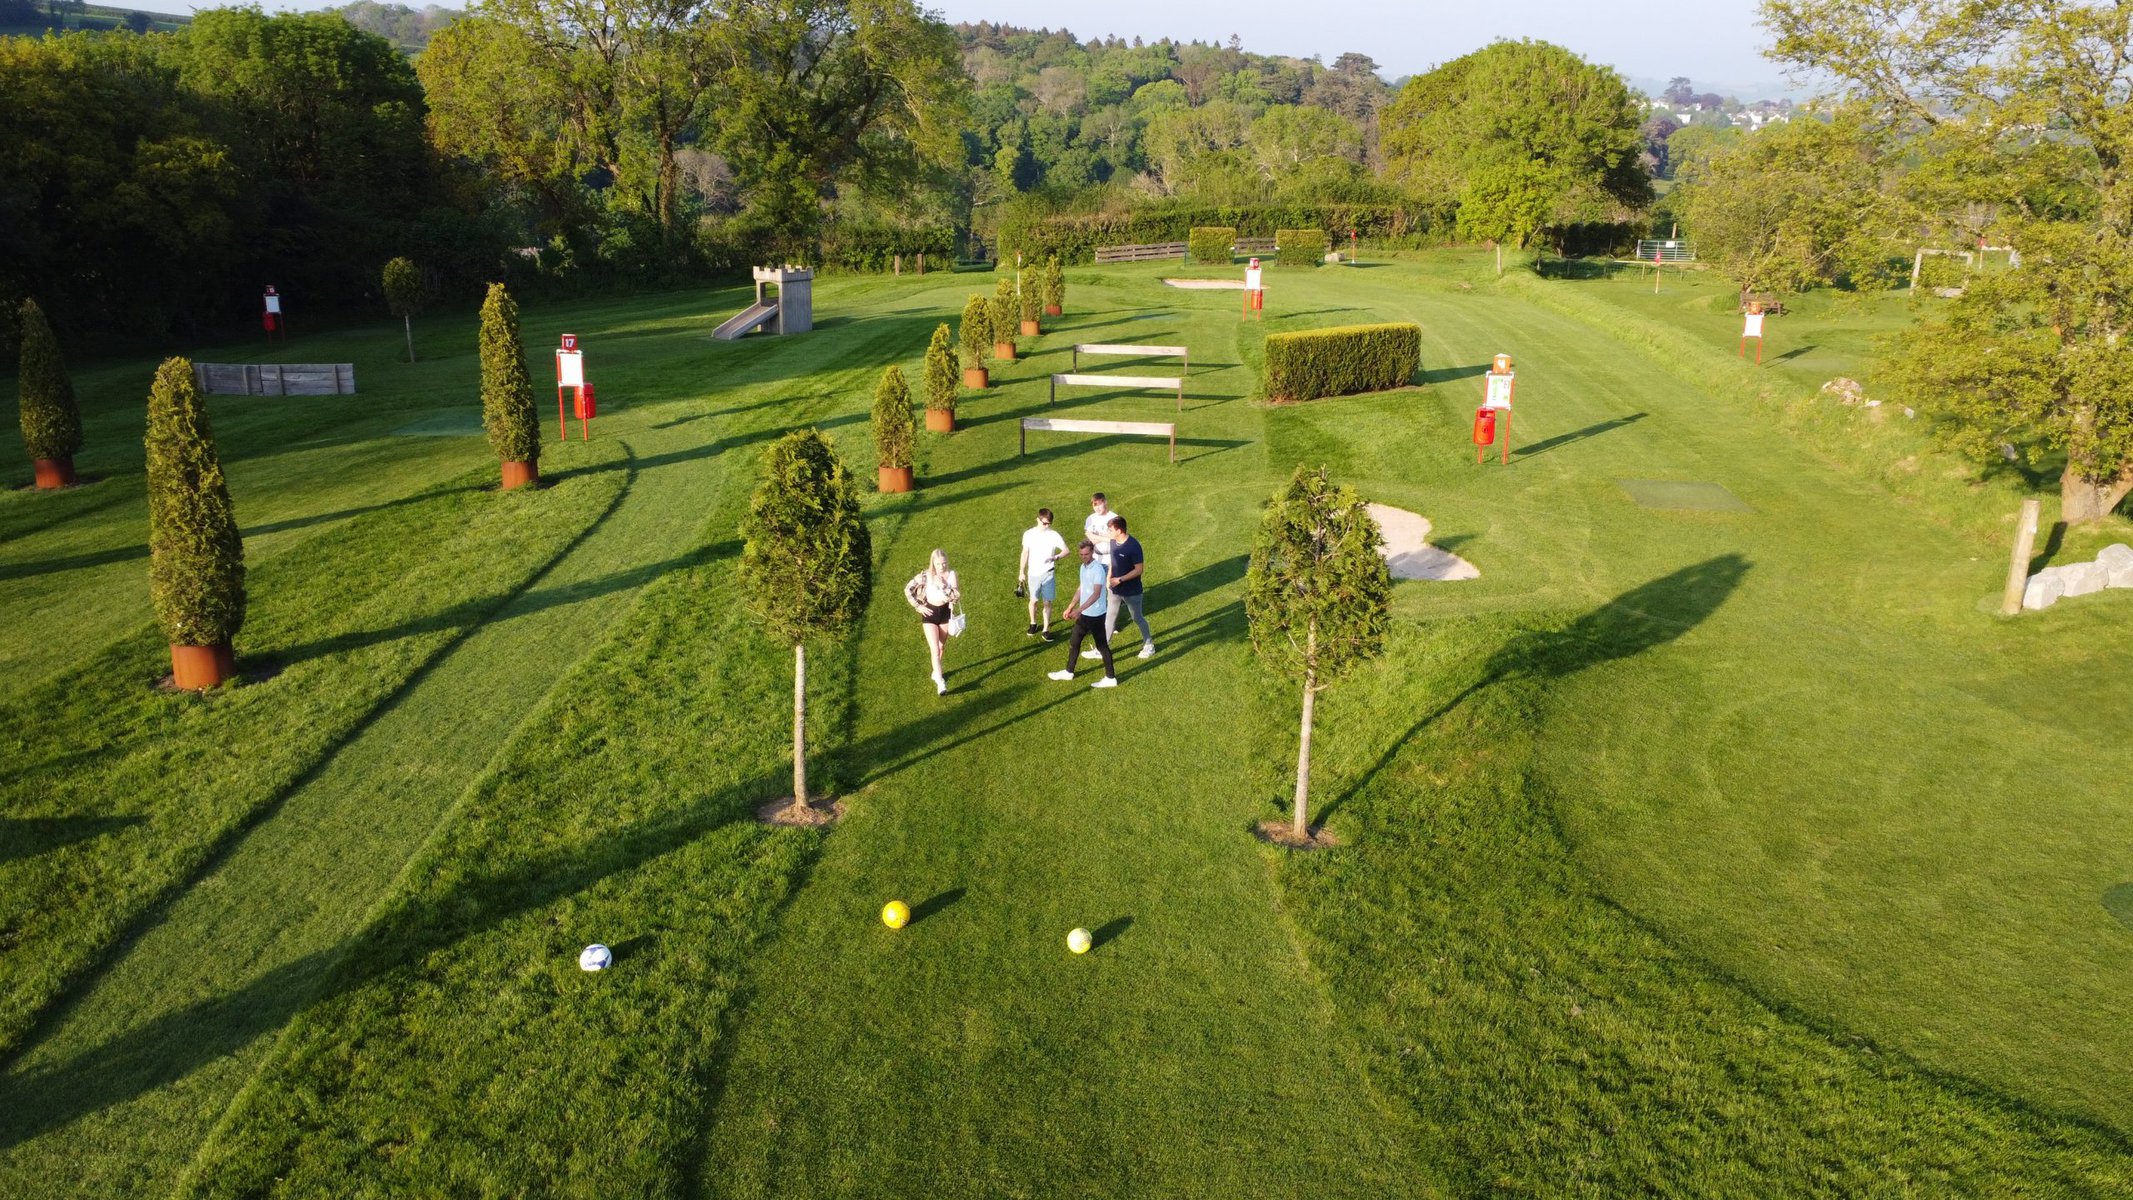 On the Fairway at Cornwall FootballGolf - The best outdoor attraction in Cornwall